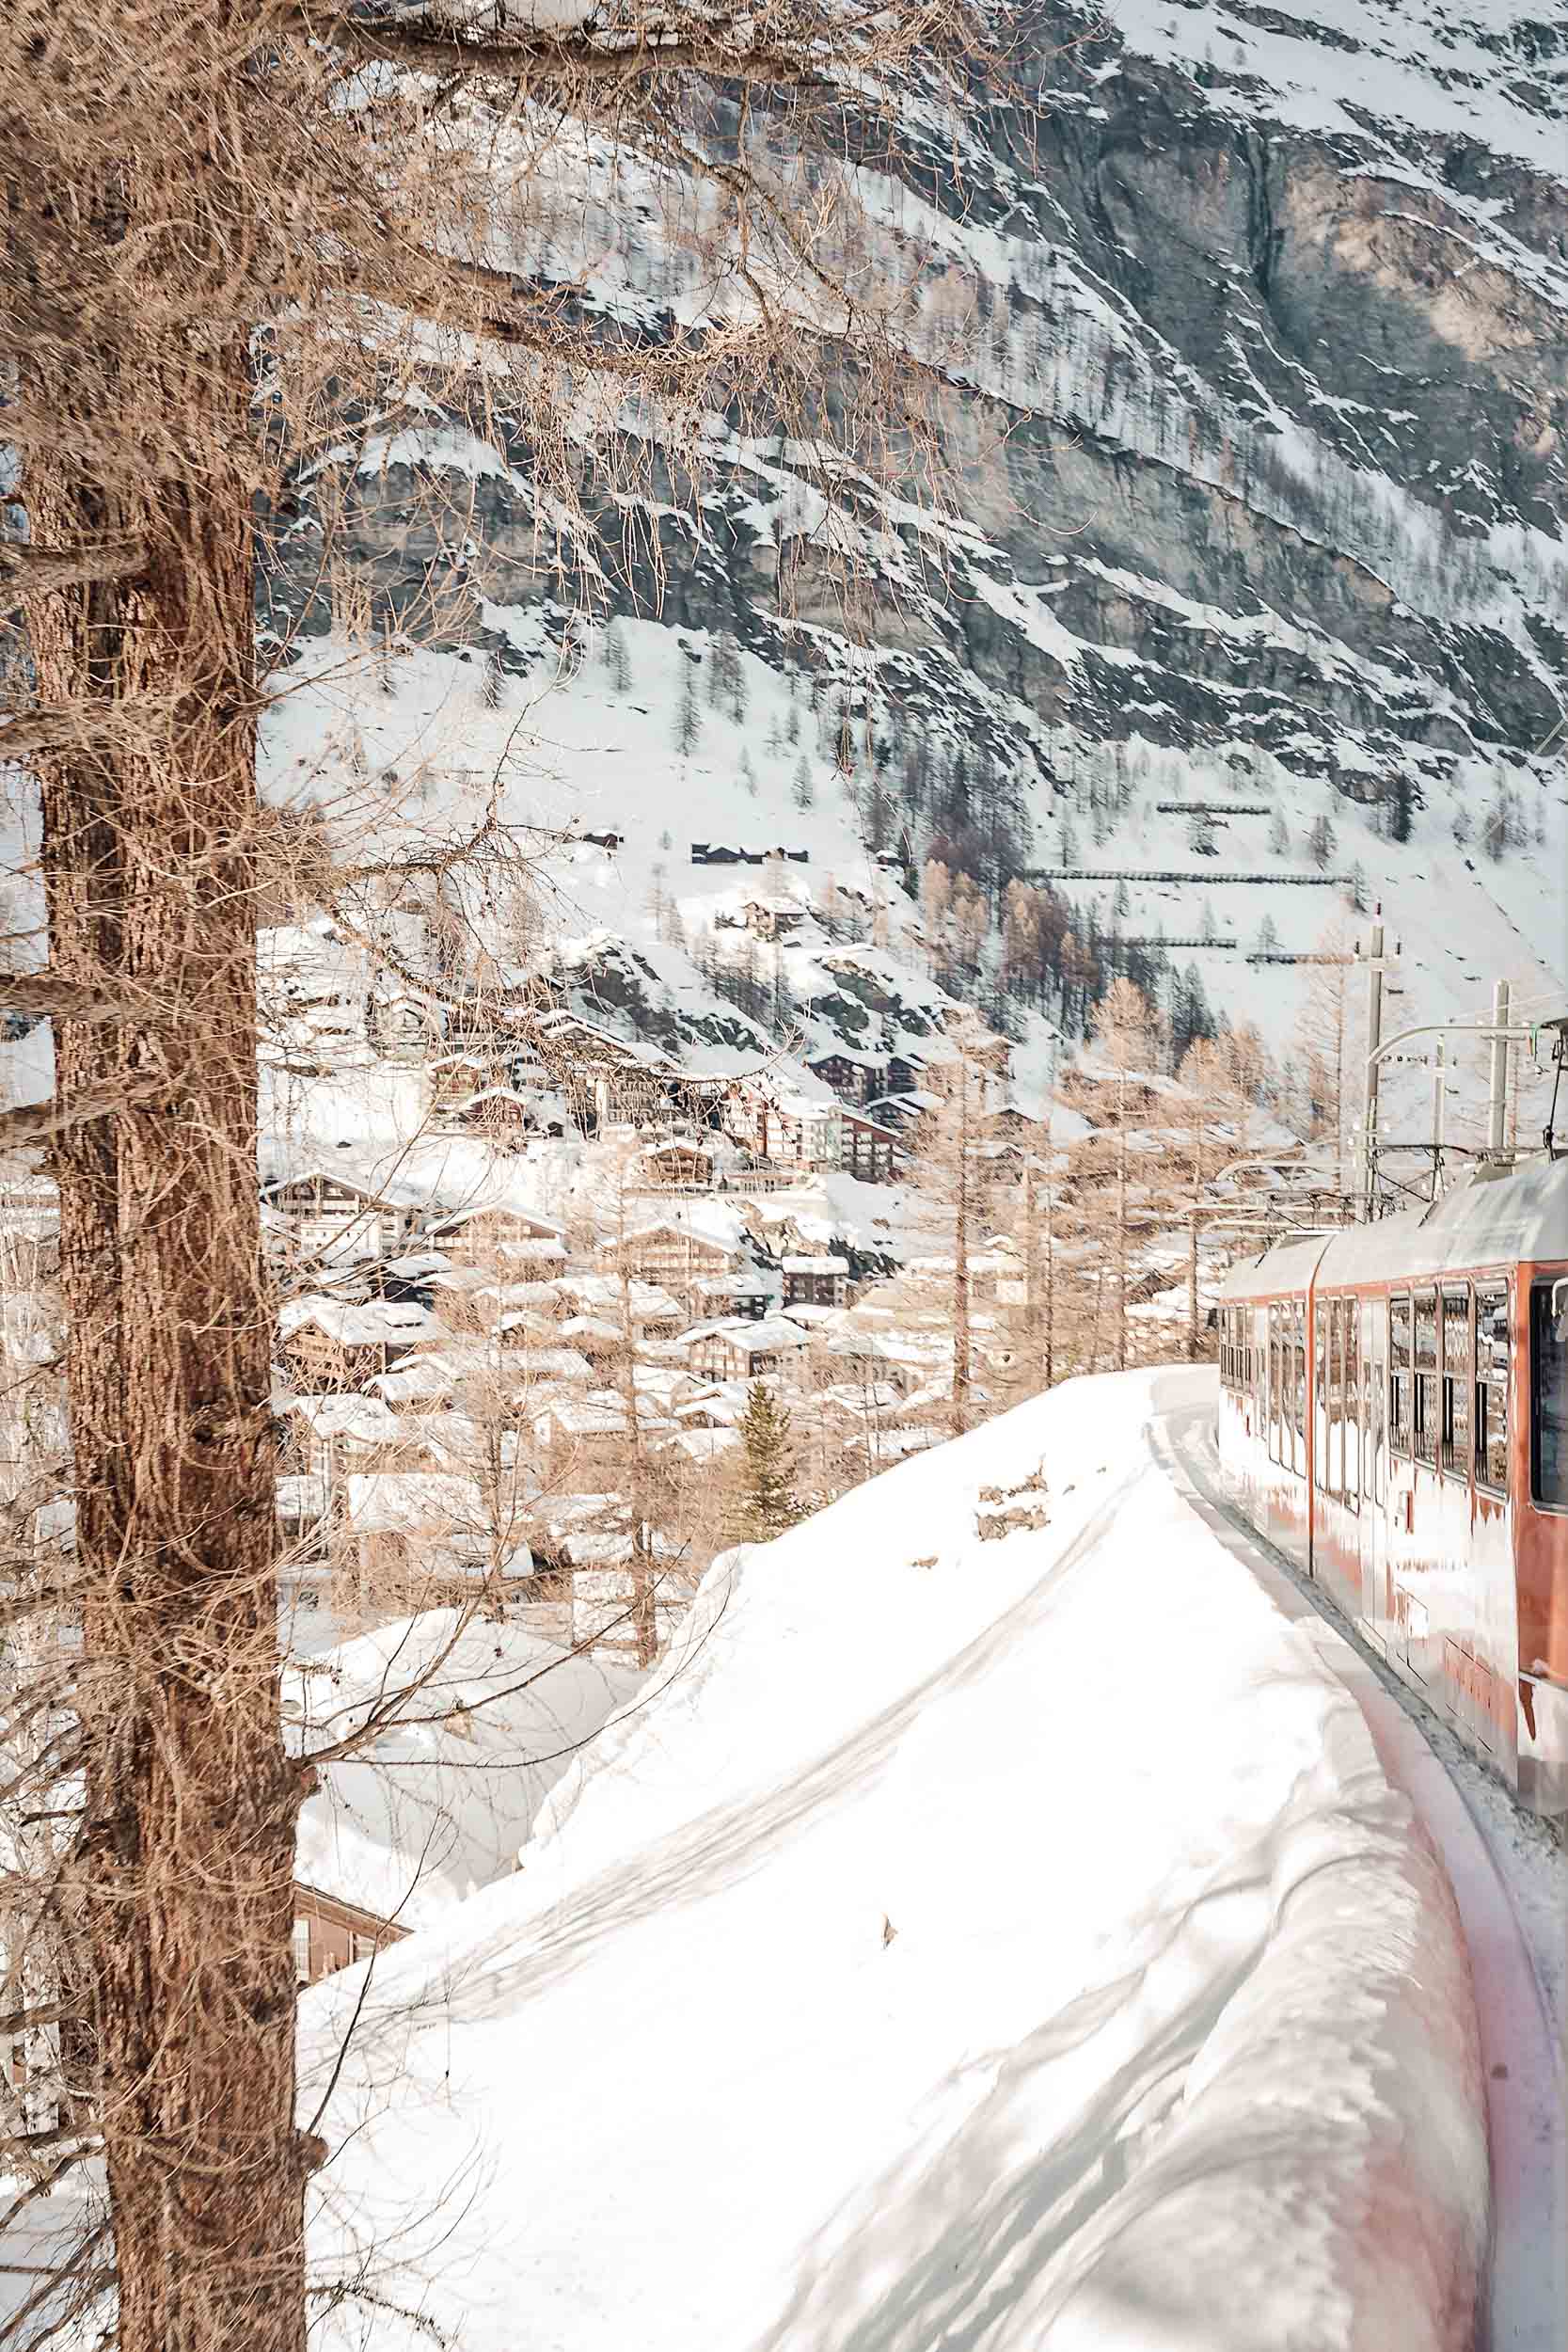 The beautiful train ride from Zermatt up to the mountains